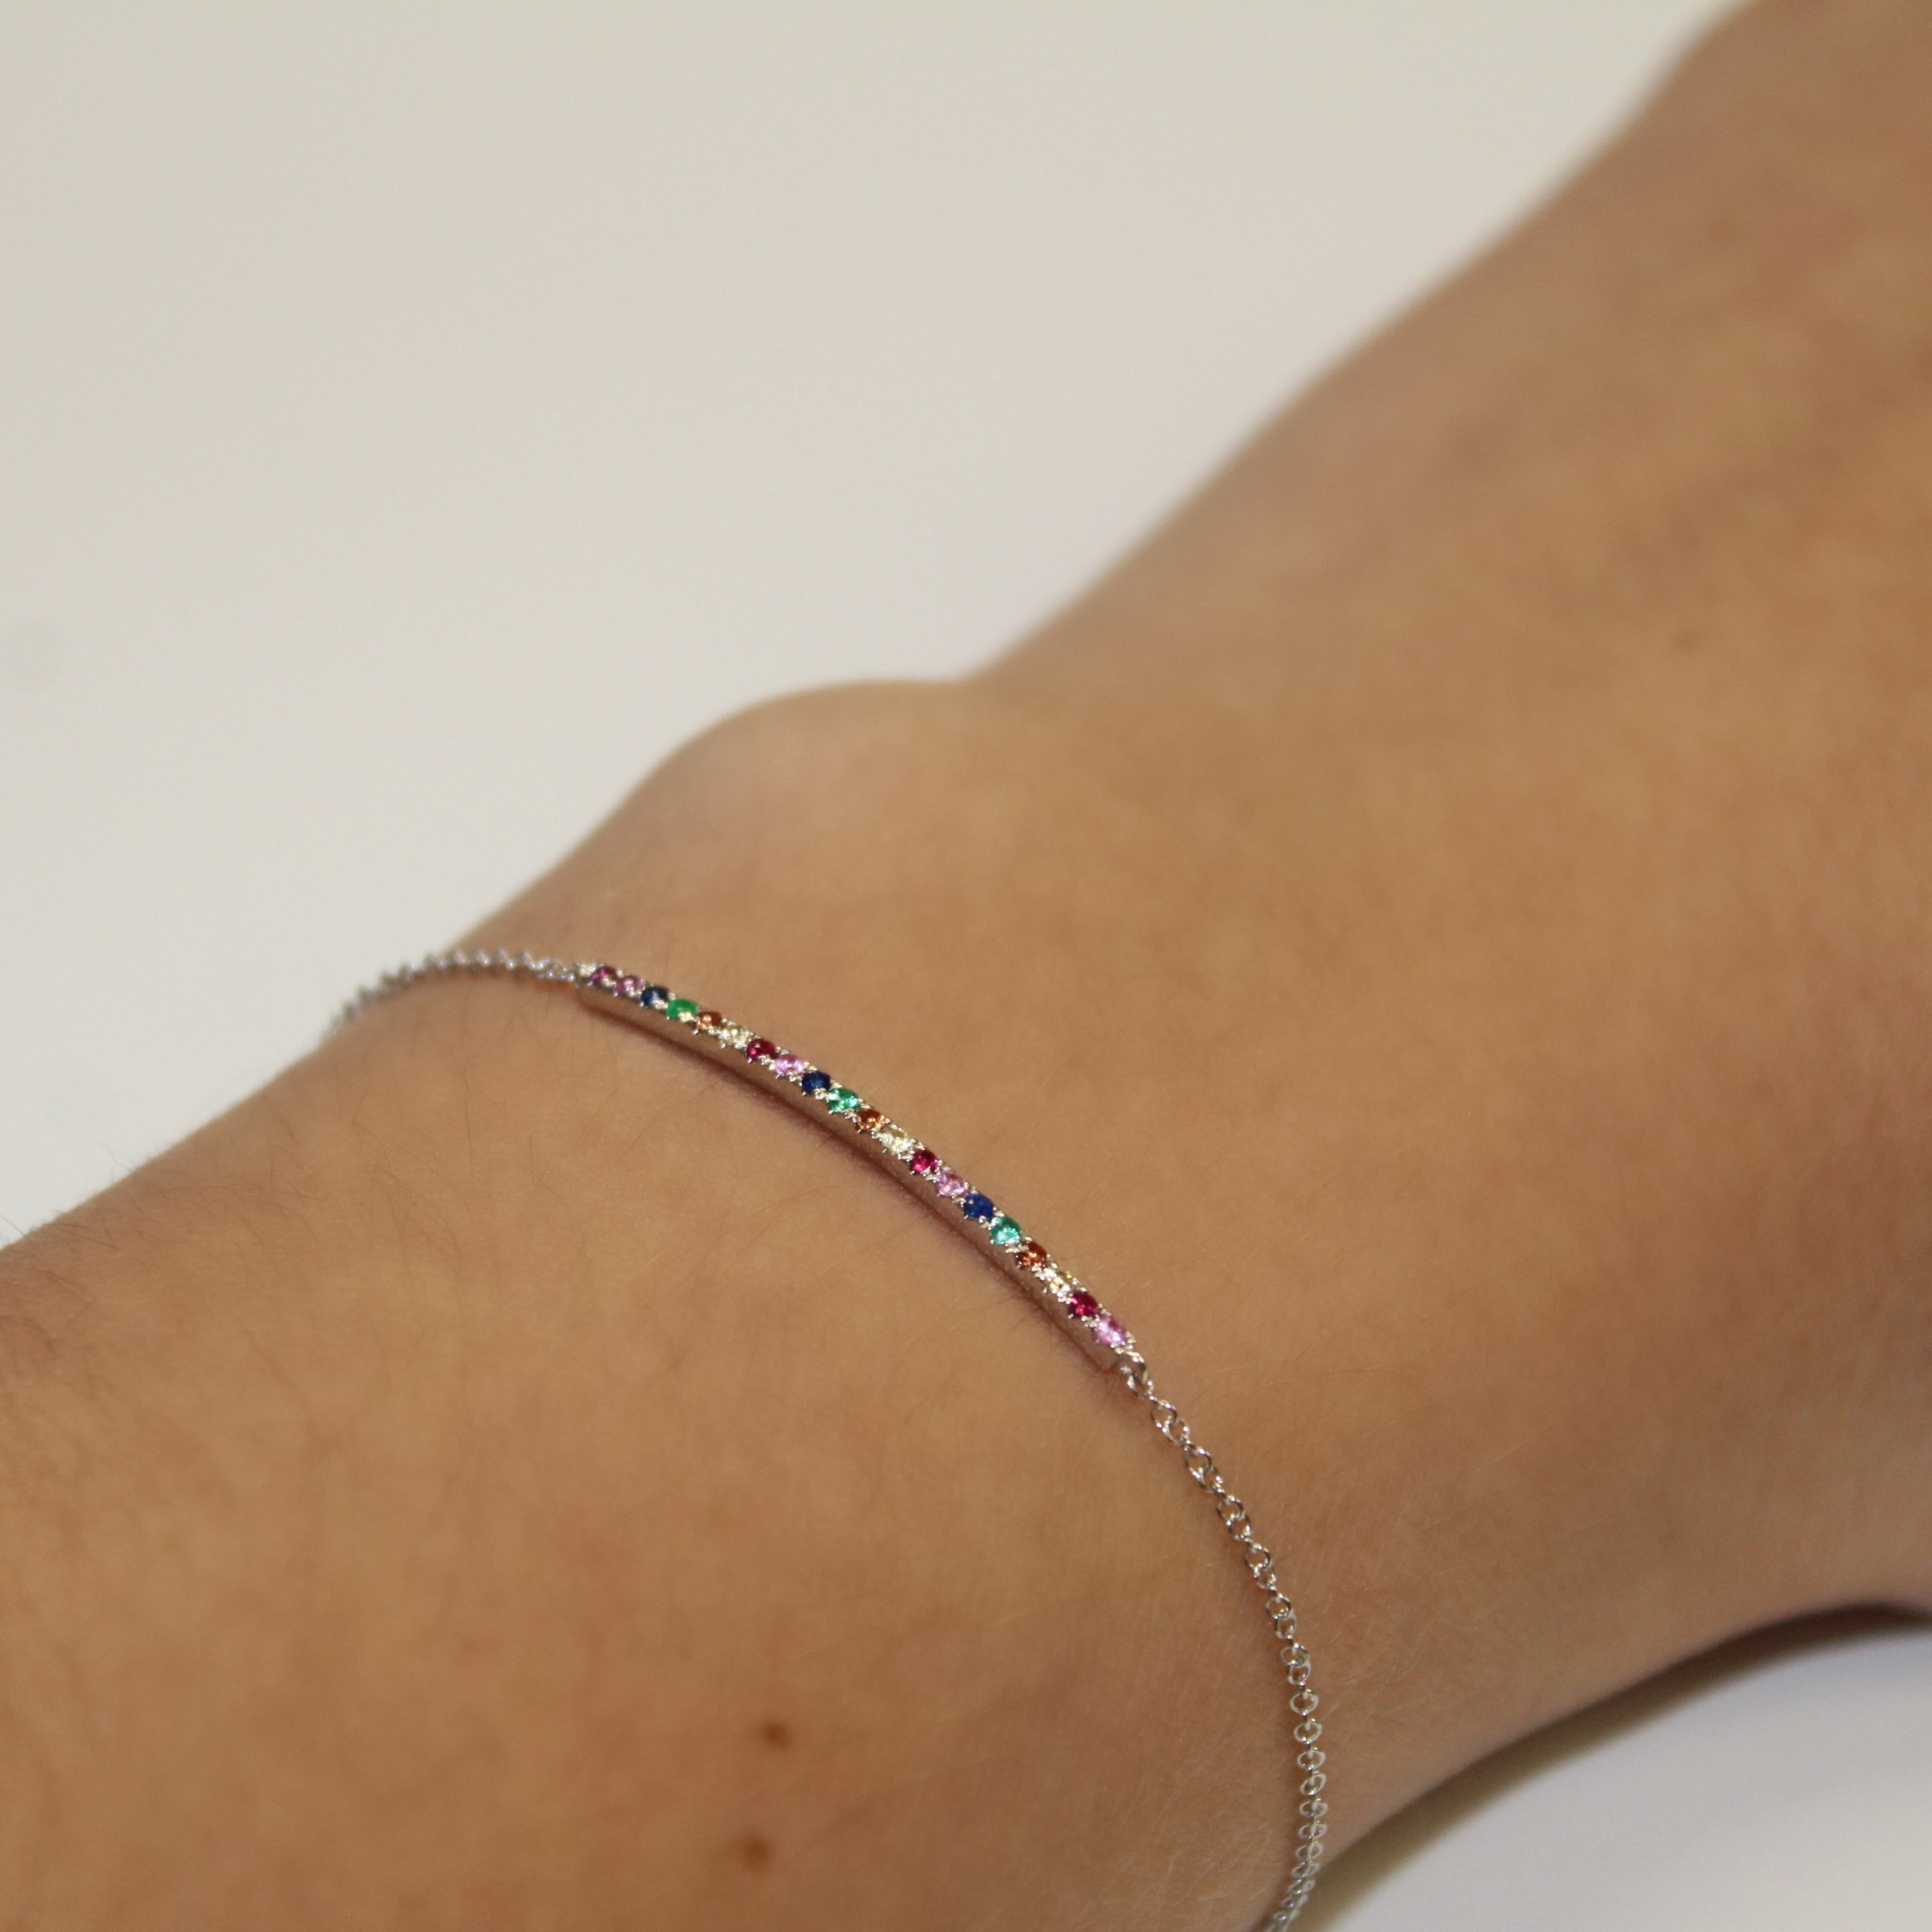 Buy Multi Sapphire Bracelet in Platinum Over Sterling Silver, Silver Tennis  Bracelet,Birthday Gifts (7.25 In) 19.00 ctw at ShopLC.